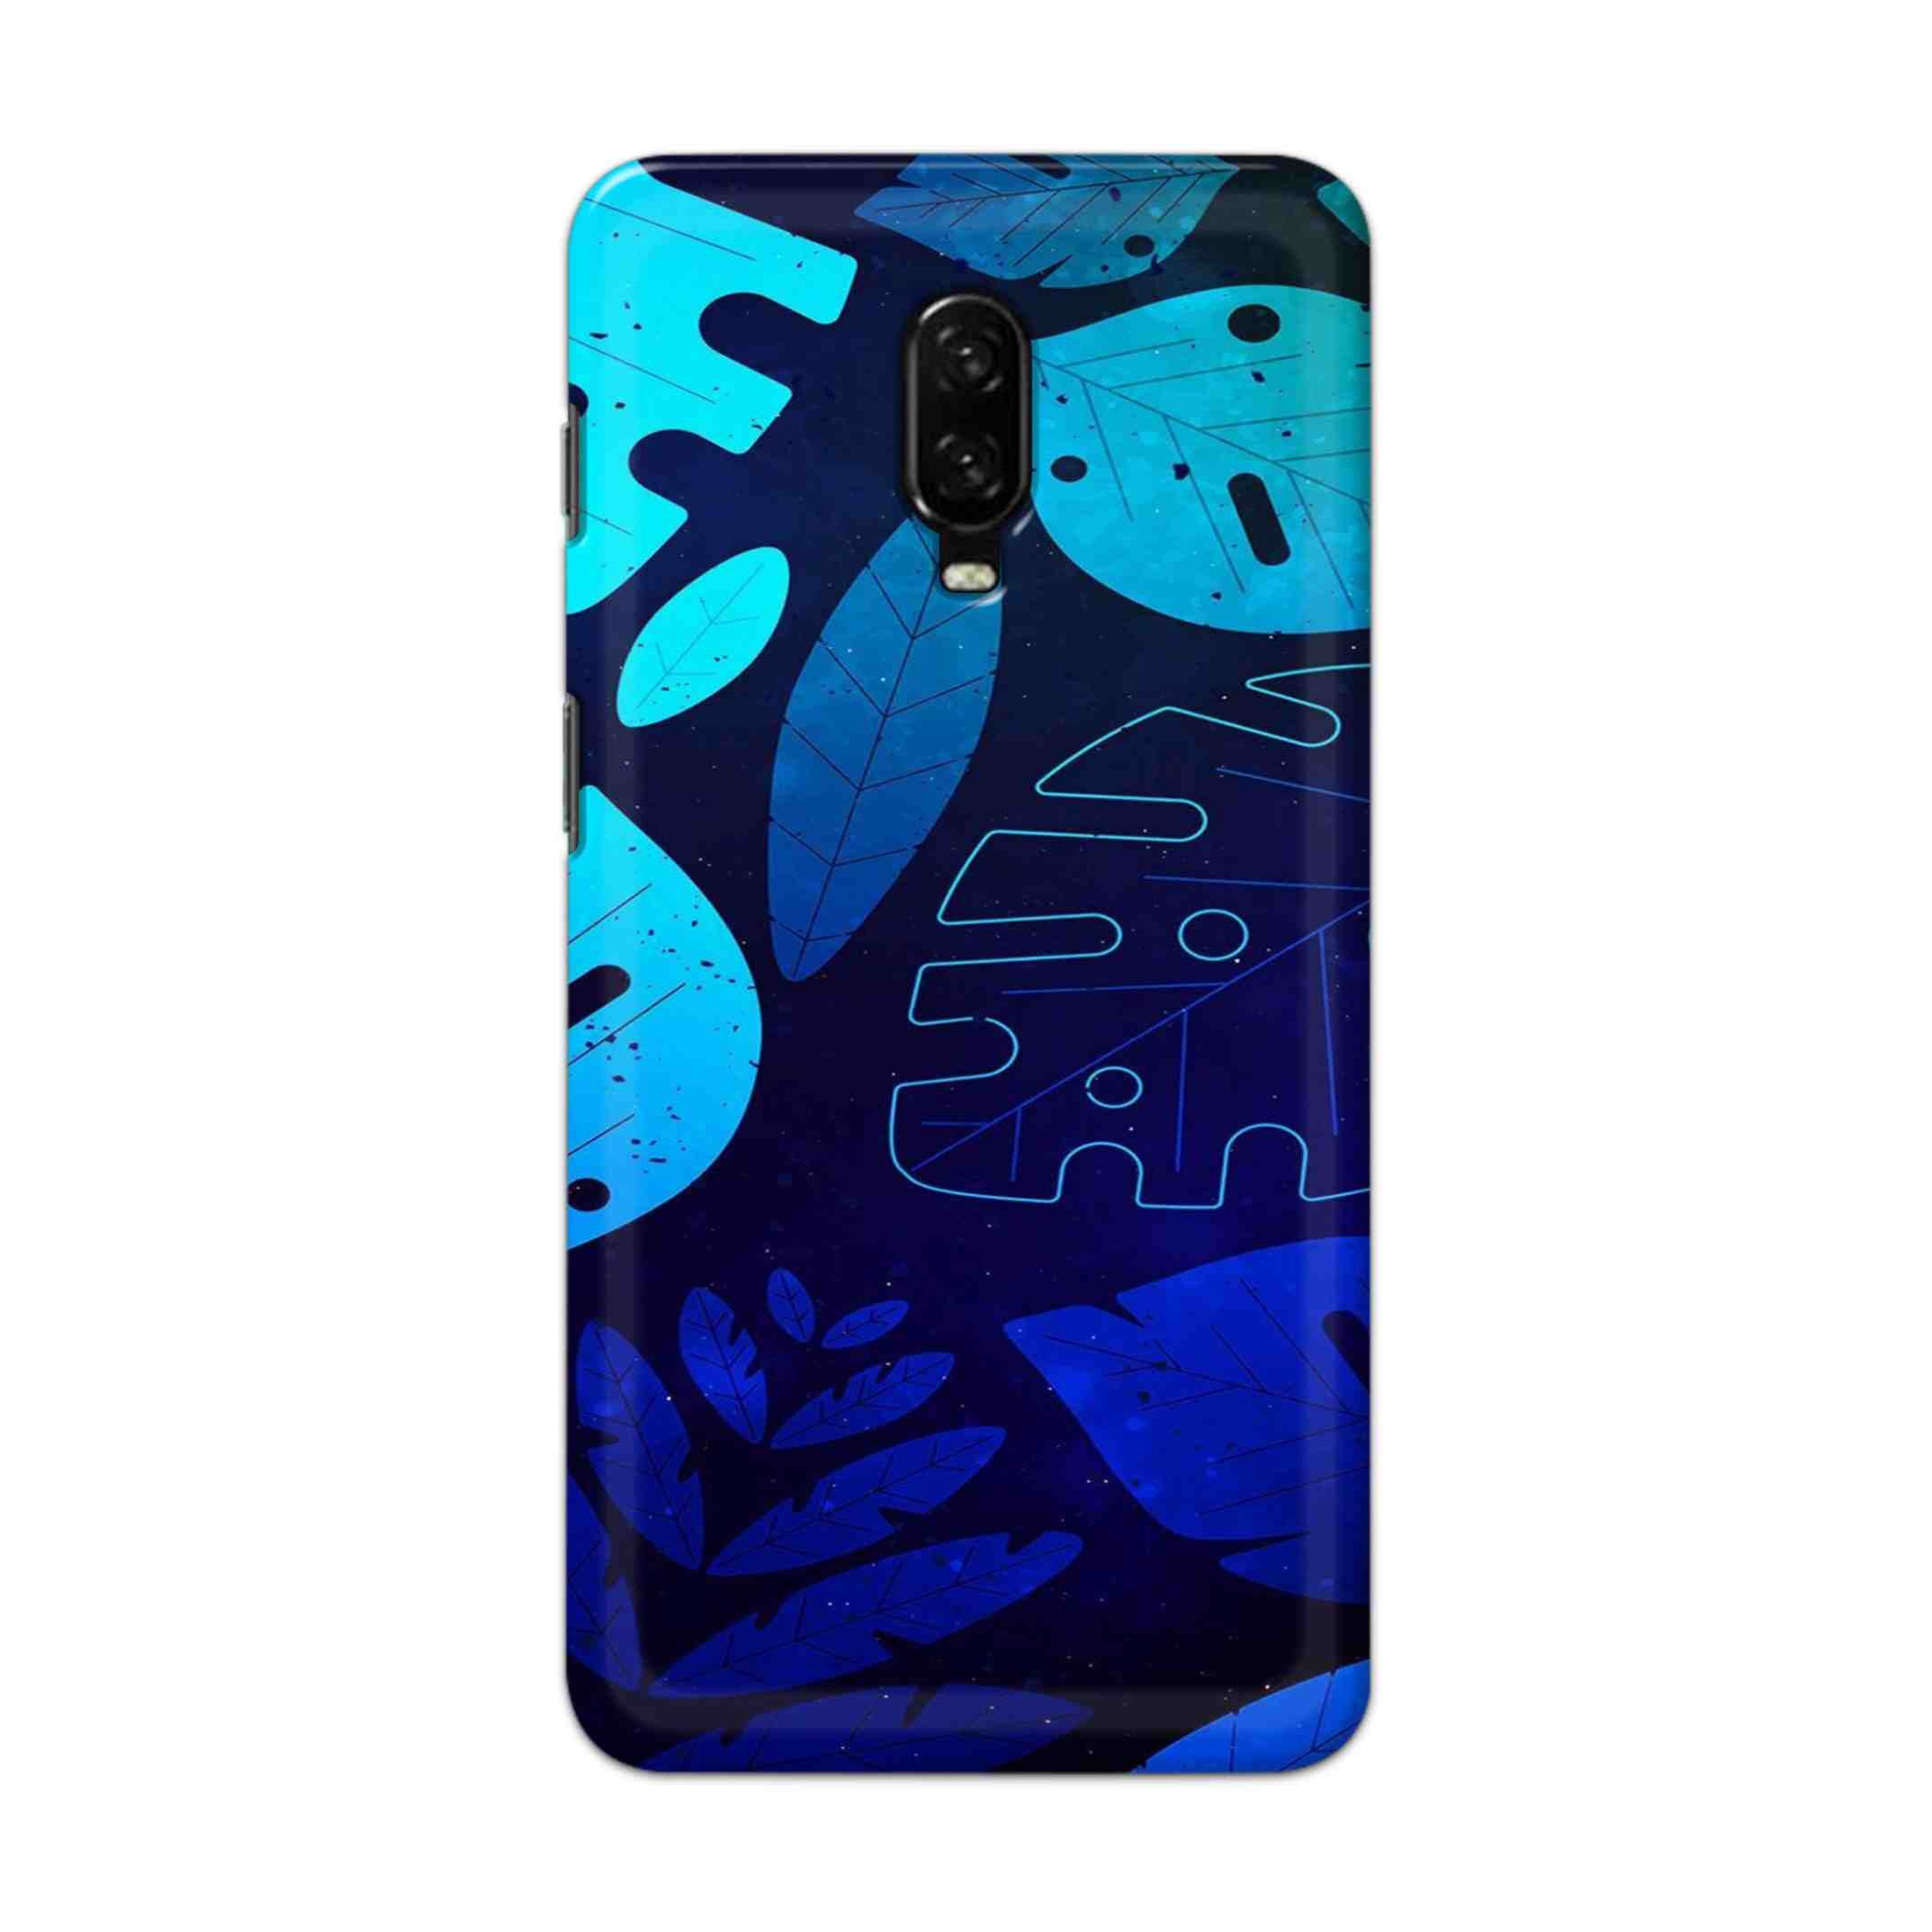 Buy Neon Leaf Hard Back Mobile Phone Case Cover For OnePlus 6T Online